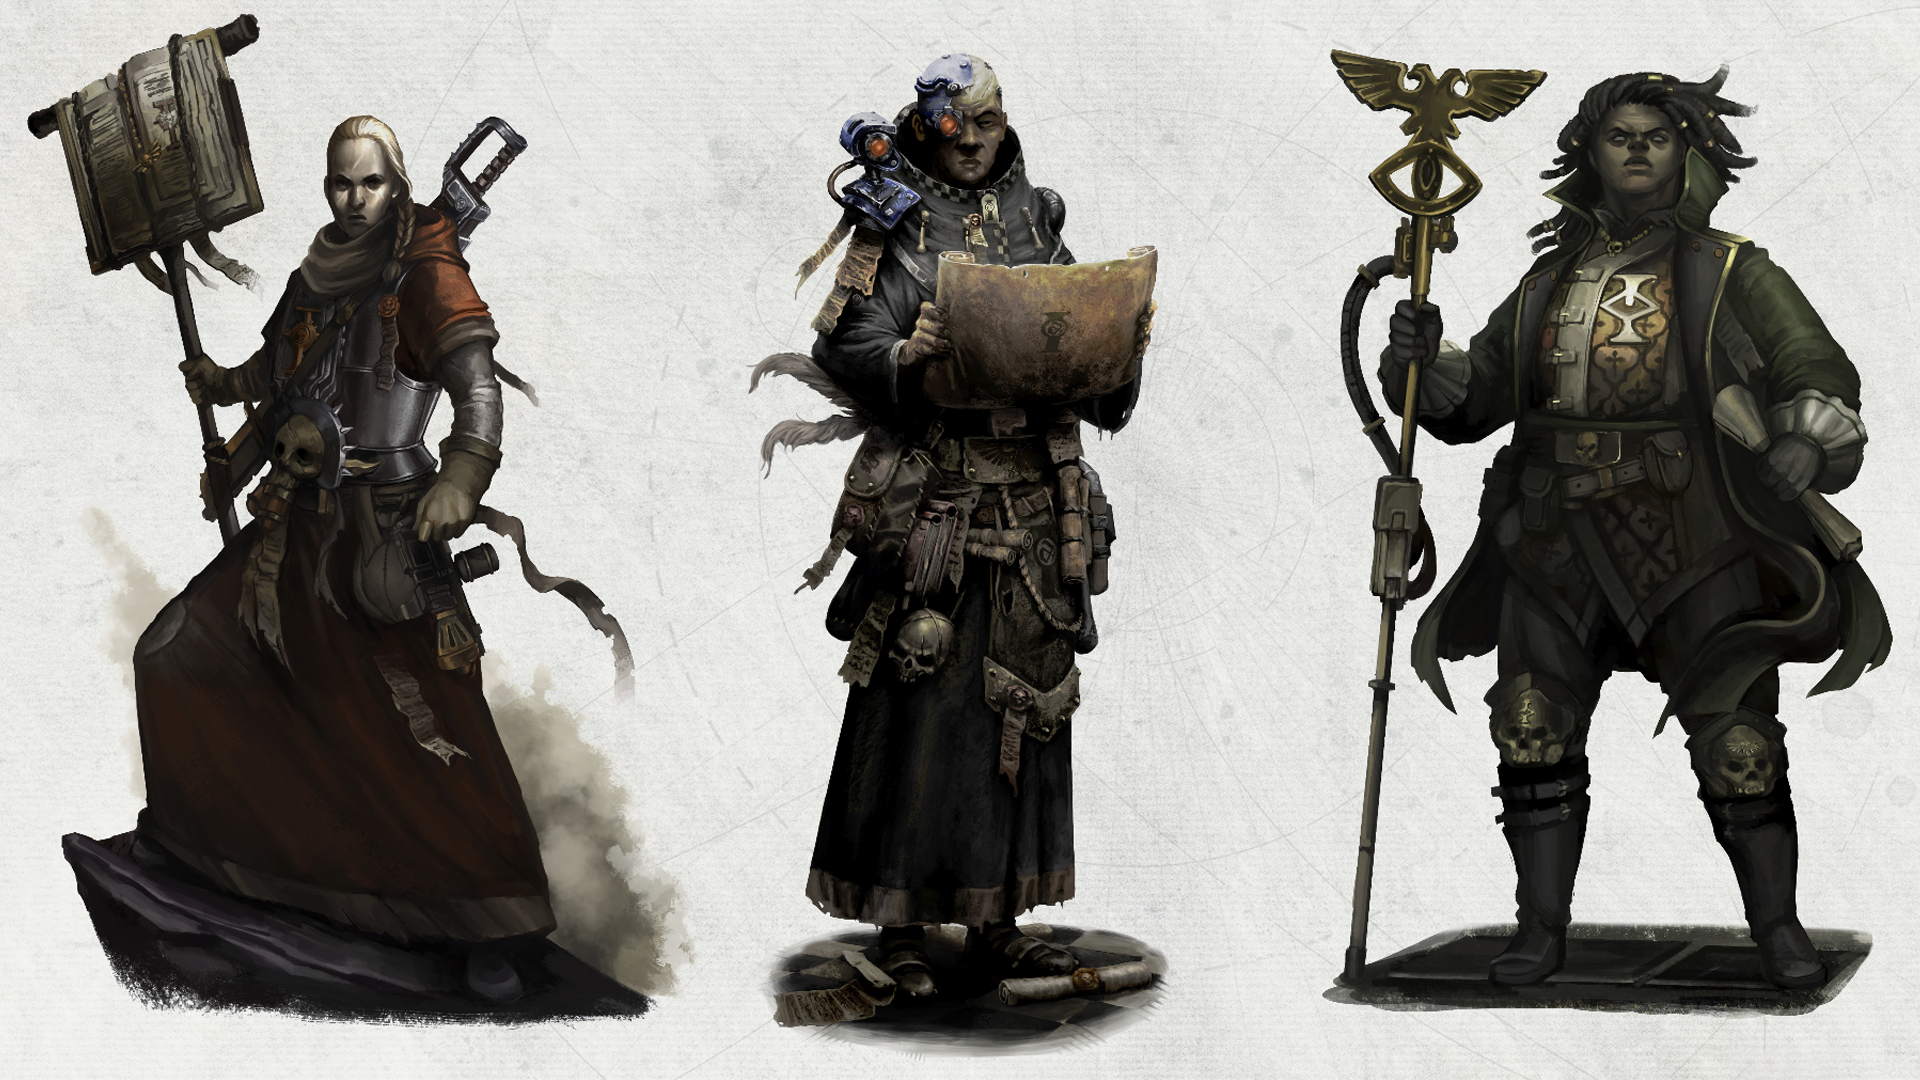 Image for Here are the character creation options you’ll have in Warhammer 40k RPG Imperium Maledictum